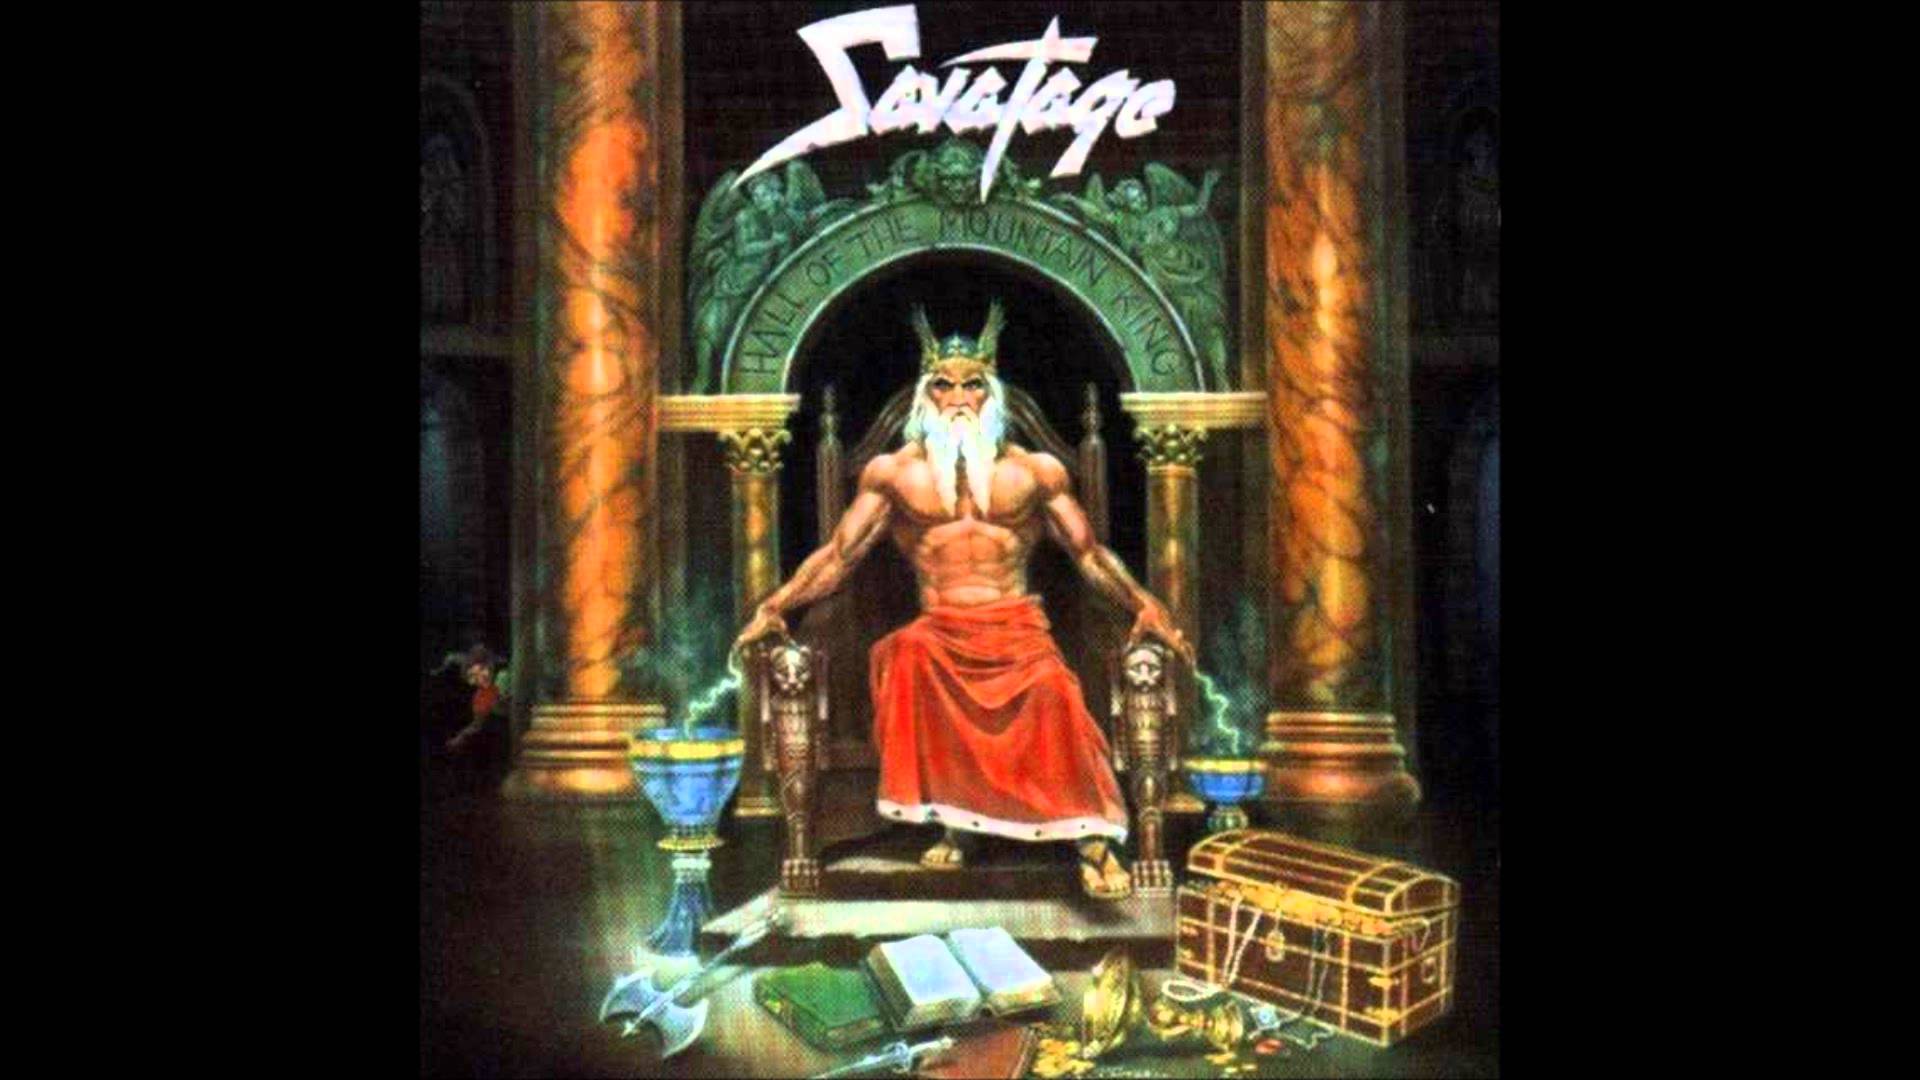 Savatage - Prelude to Madness, Hall of the Mountain King - YouTube